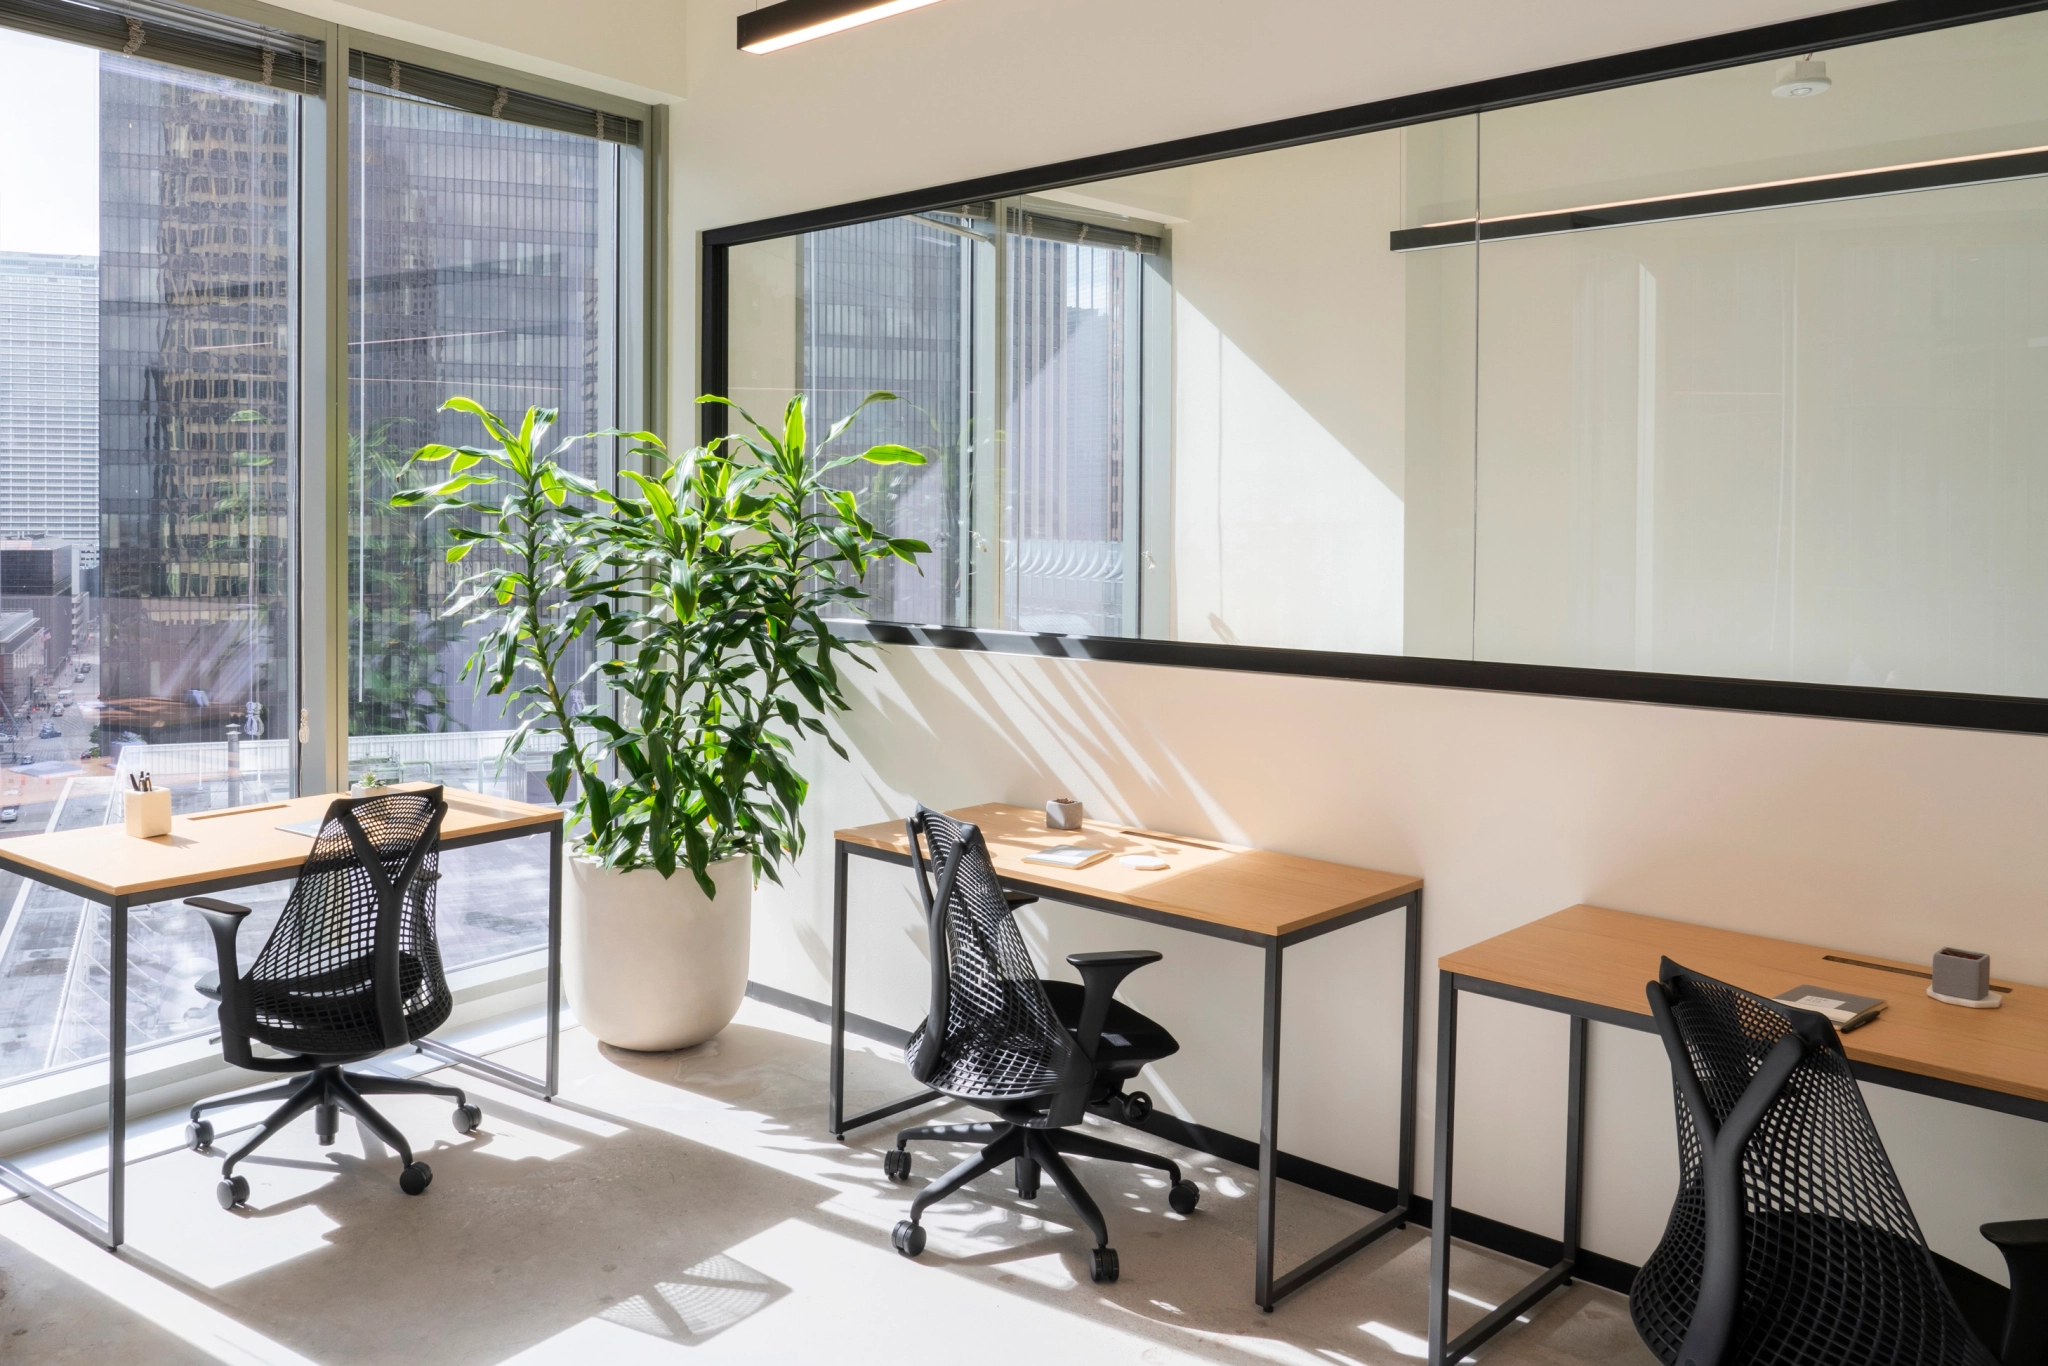 A coworking office space equipped with two desks, chairs and a vibrant plant.